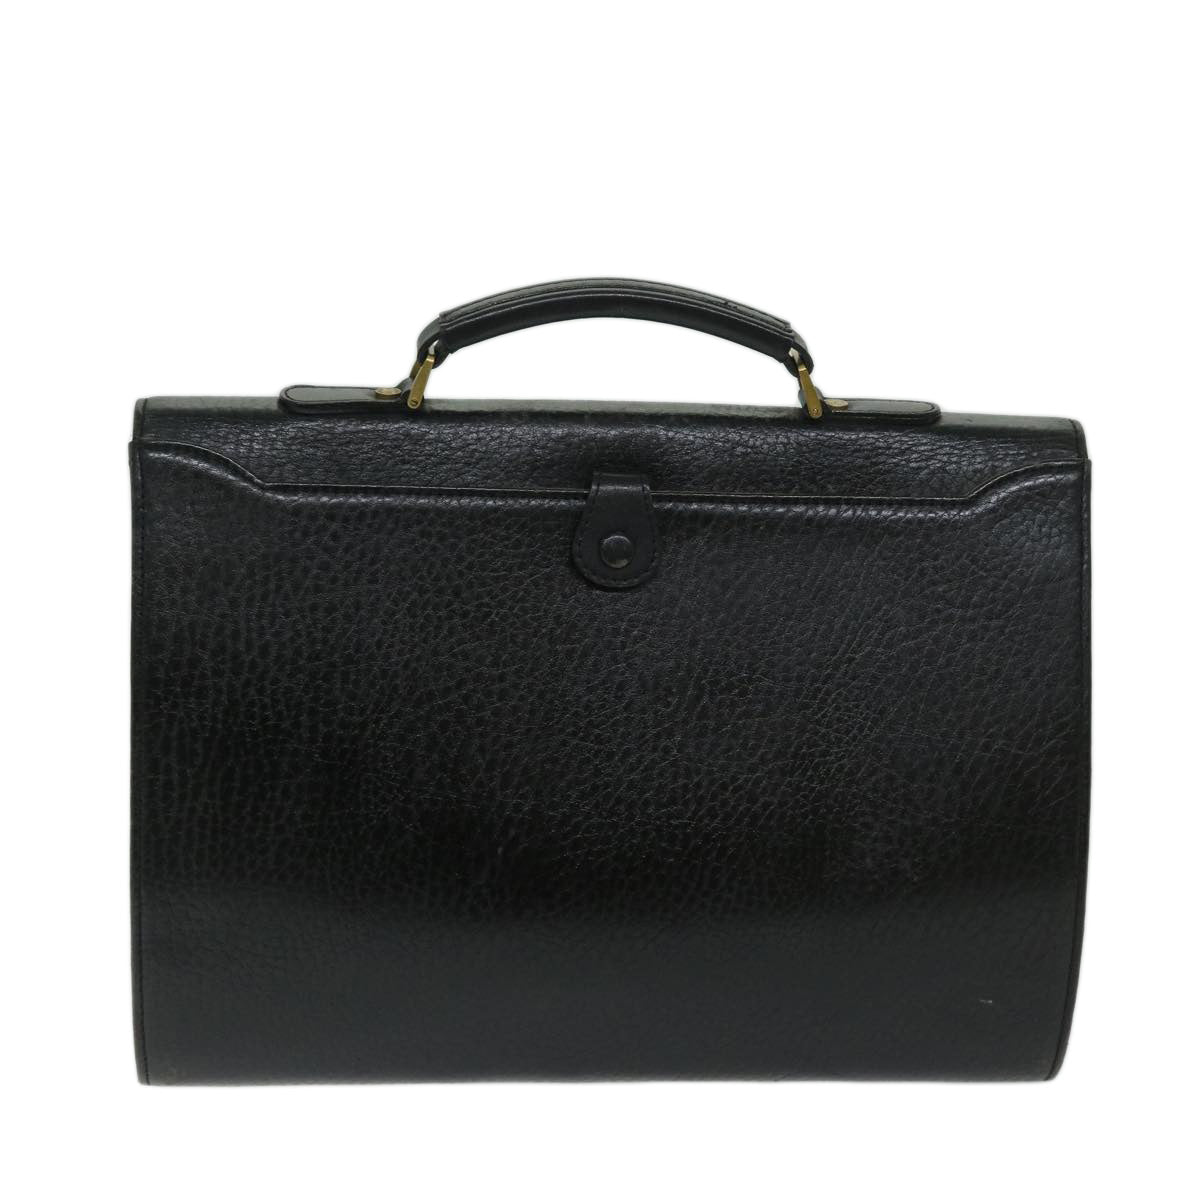 Burberrys Business Bag Leather Black Auth bs11219 - 0